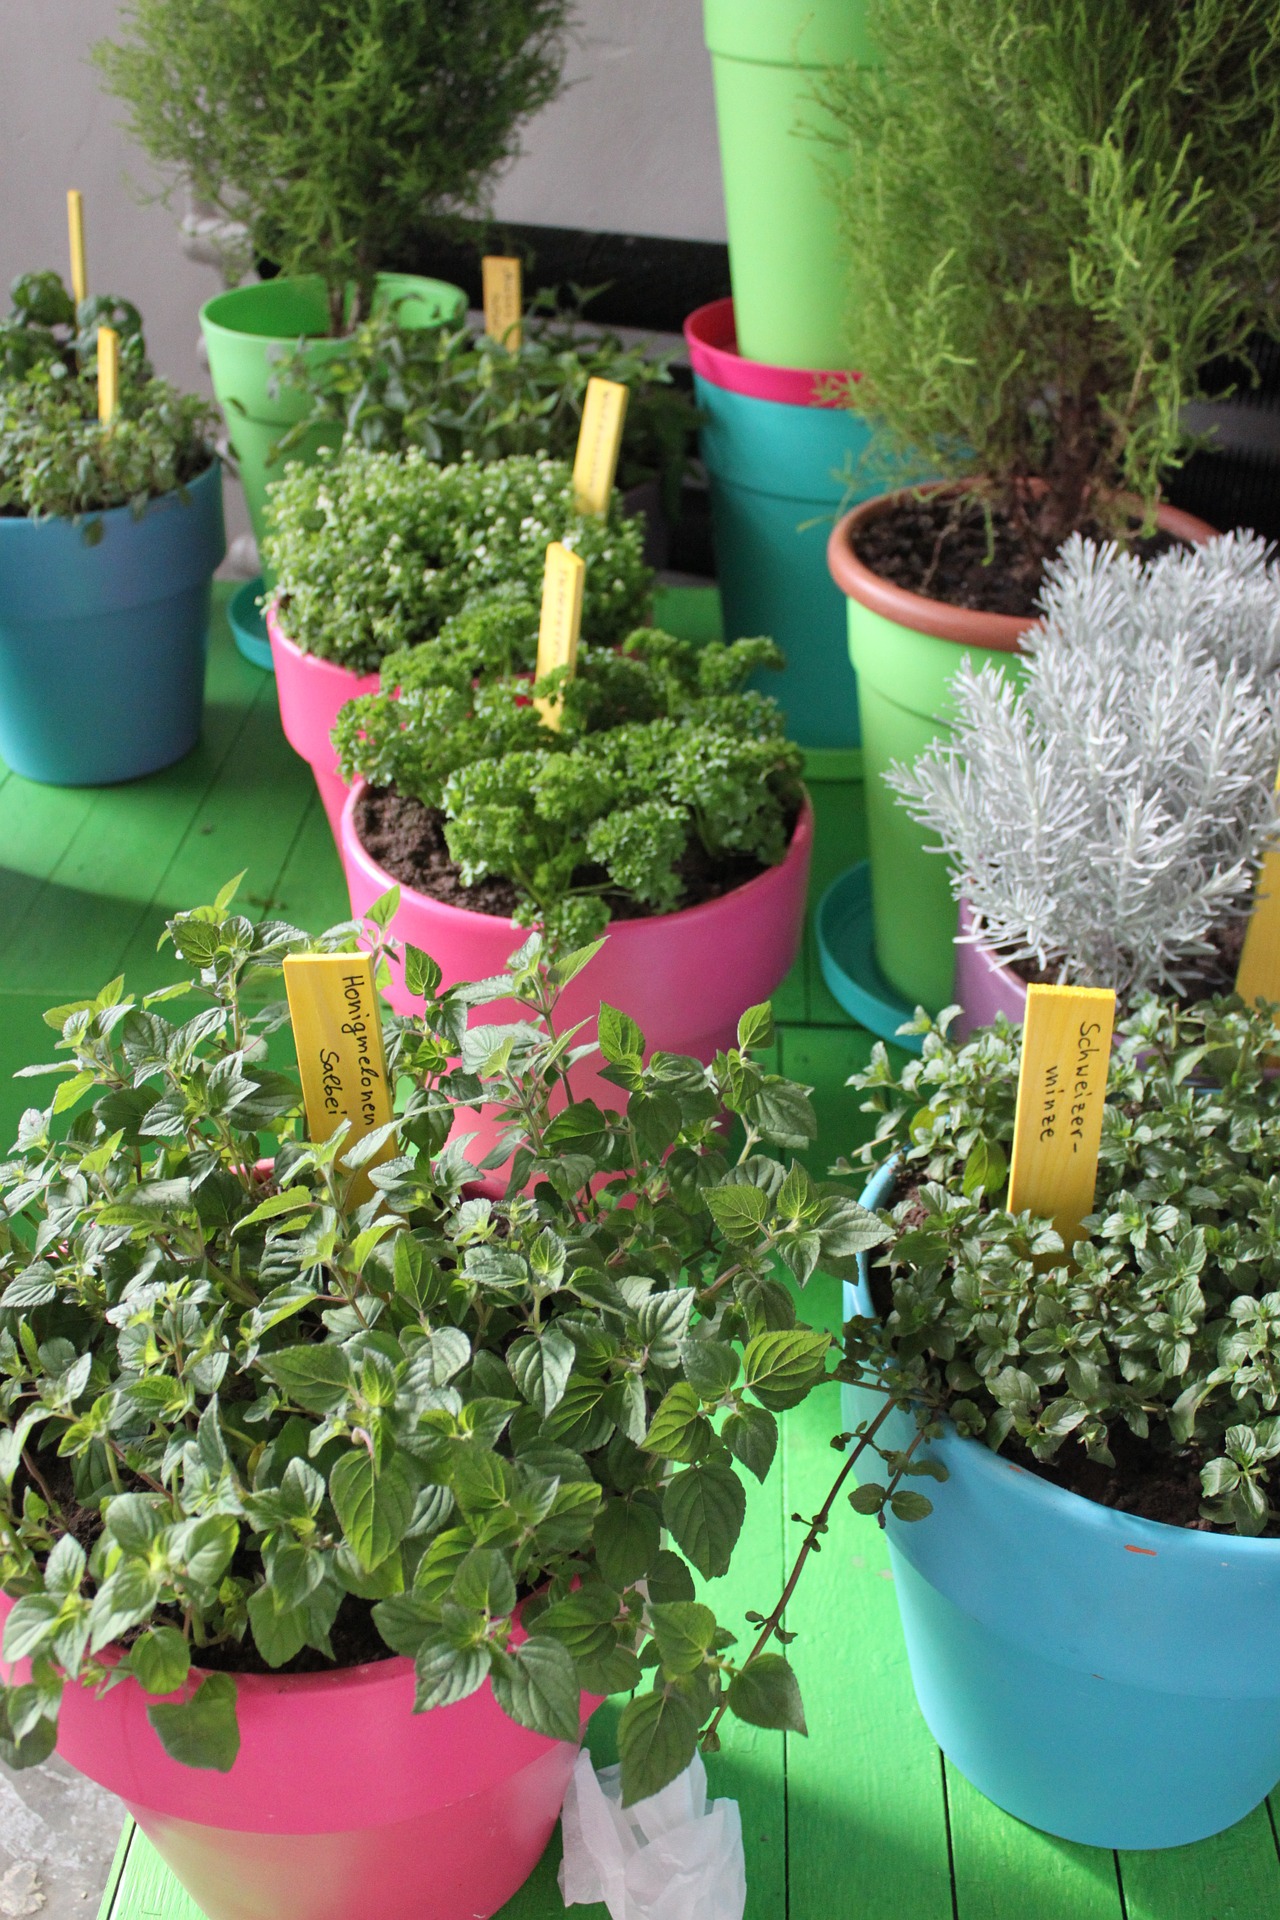 Pots of herbs in colorful planters